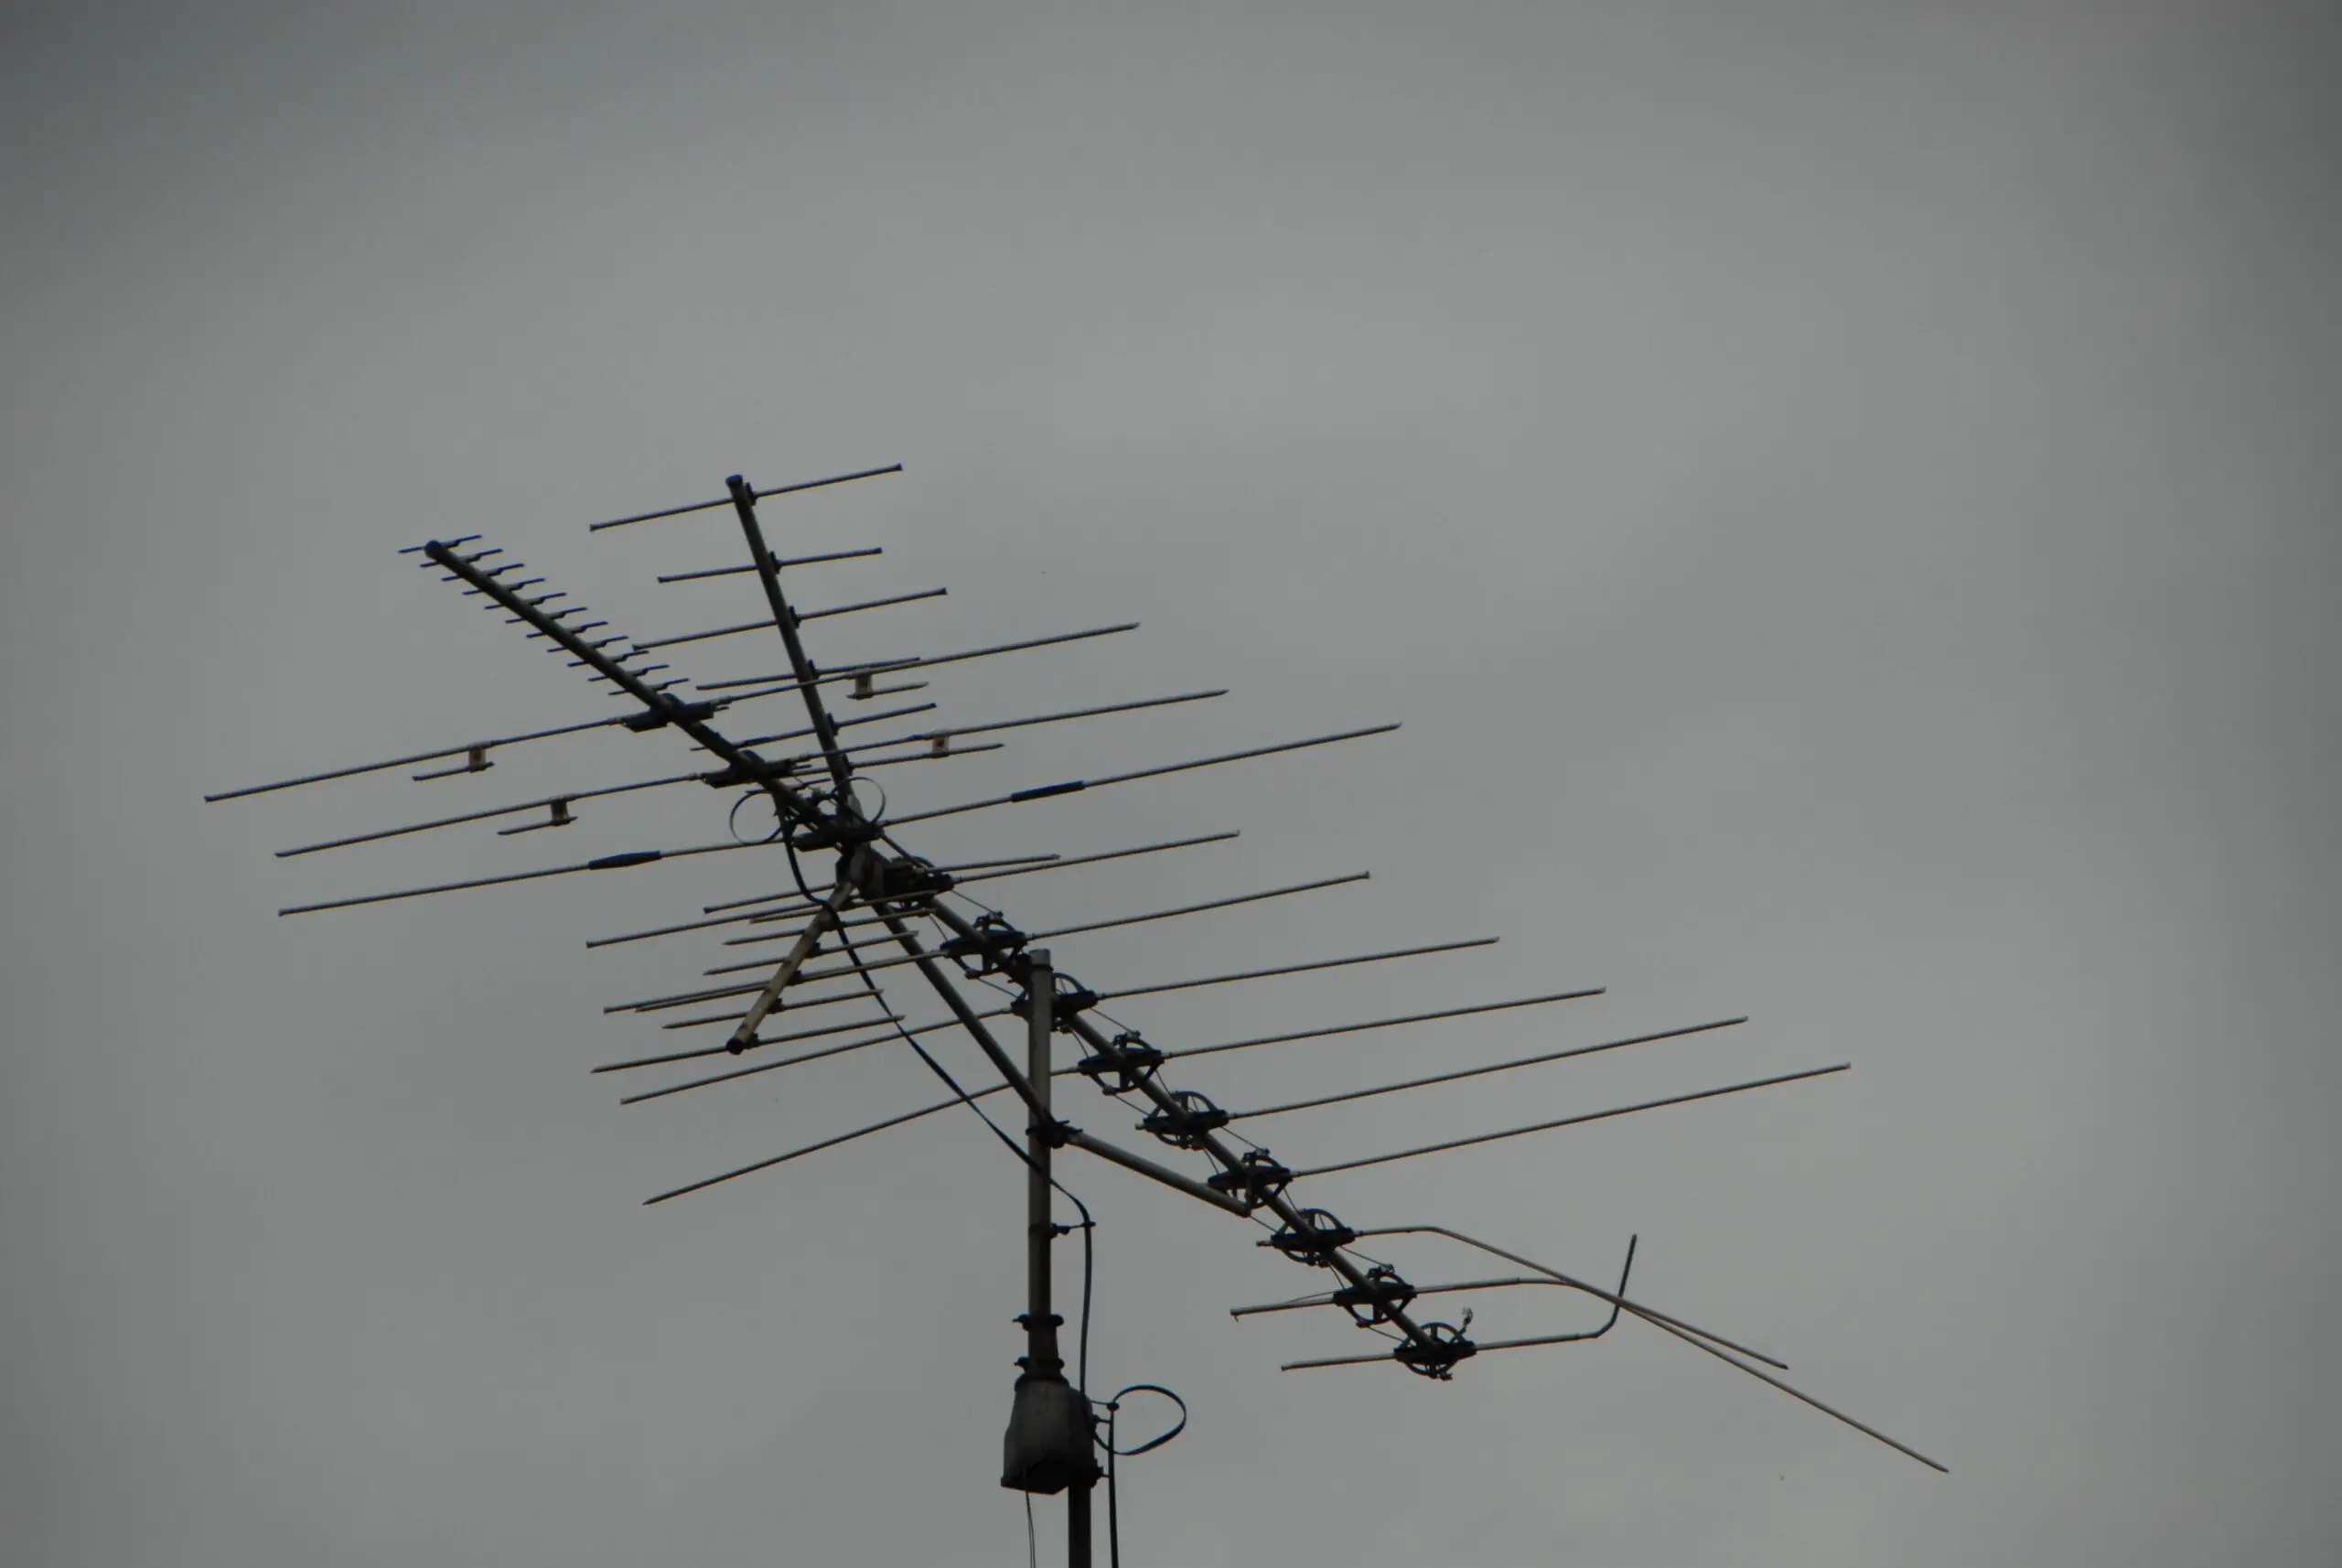 Why Does TV Antenna Work Better at Night